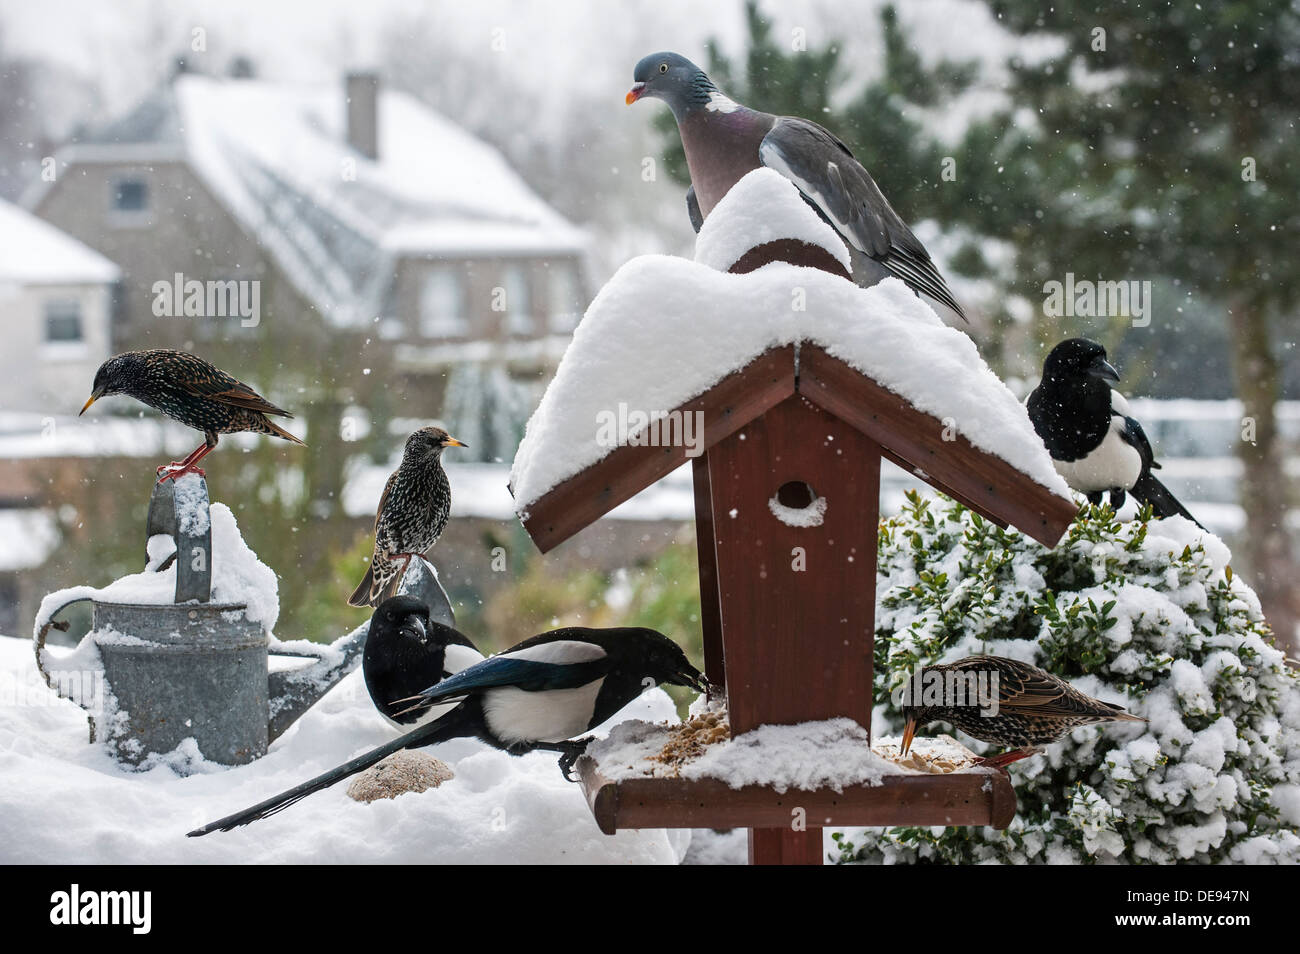 Starlings (Sturnus vulgaris), magpies (Pica pica) and wood pigeon at feeding at garden bird feeder during snow shower in winter Stock Photo